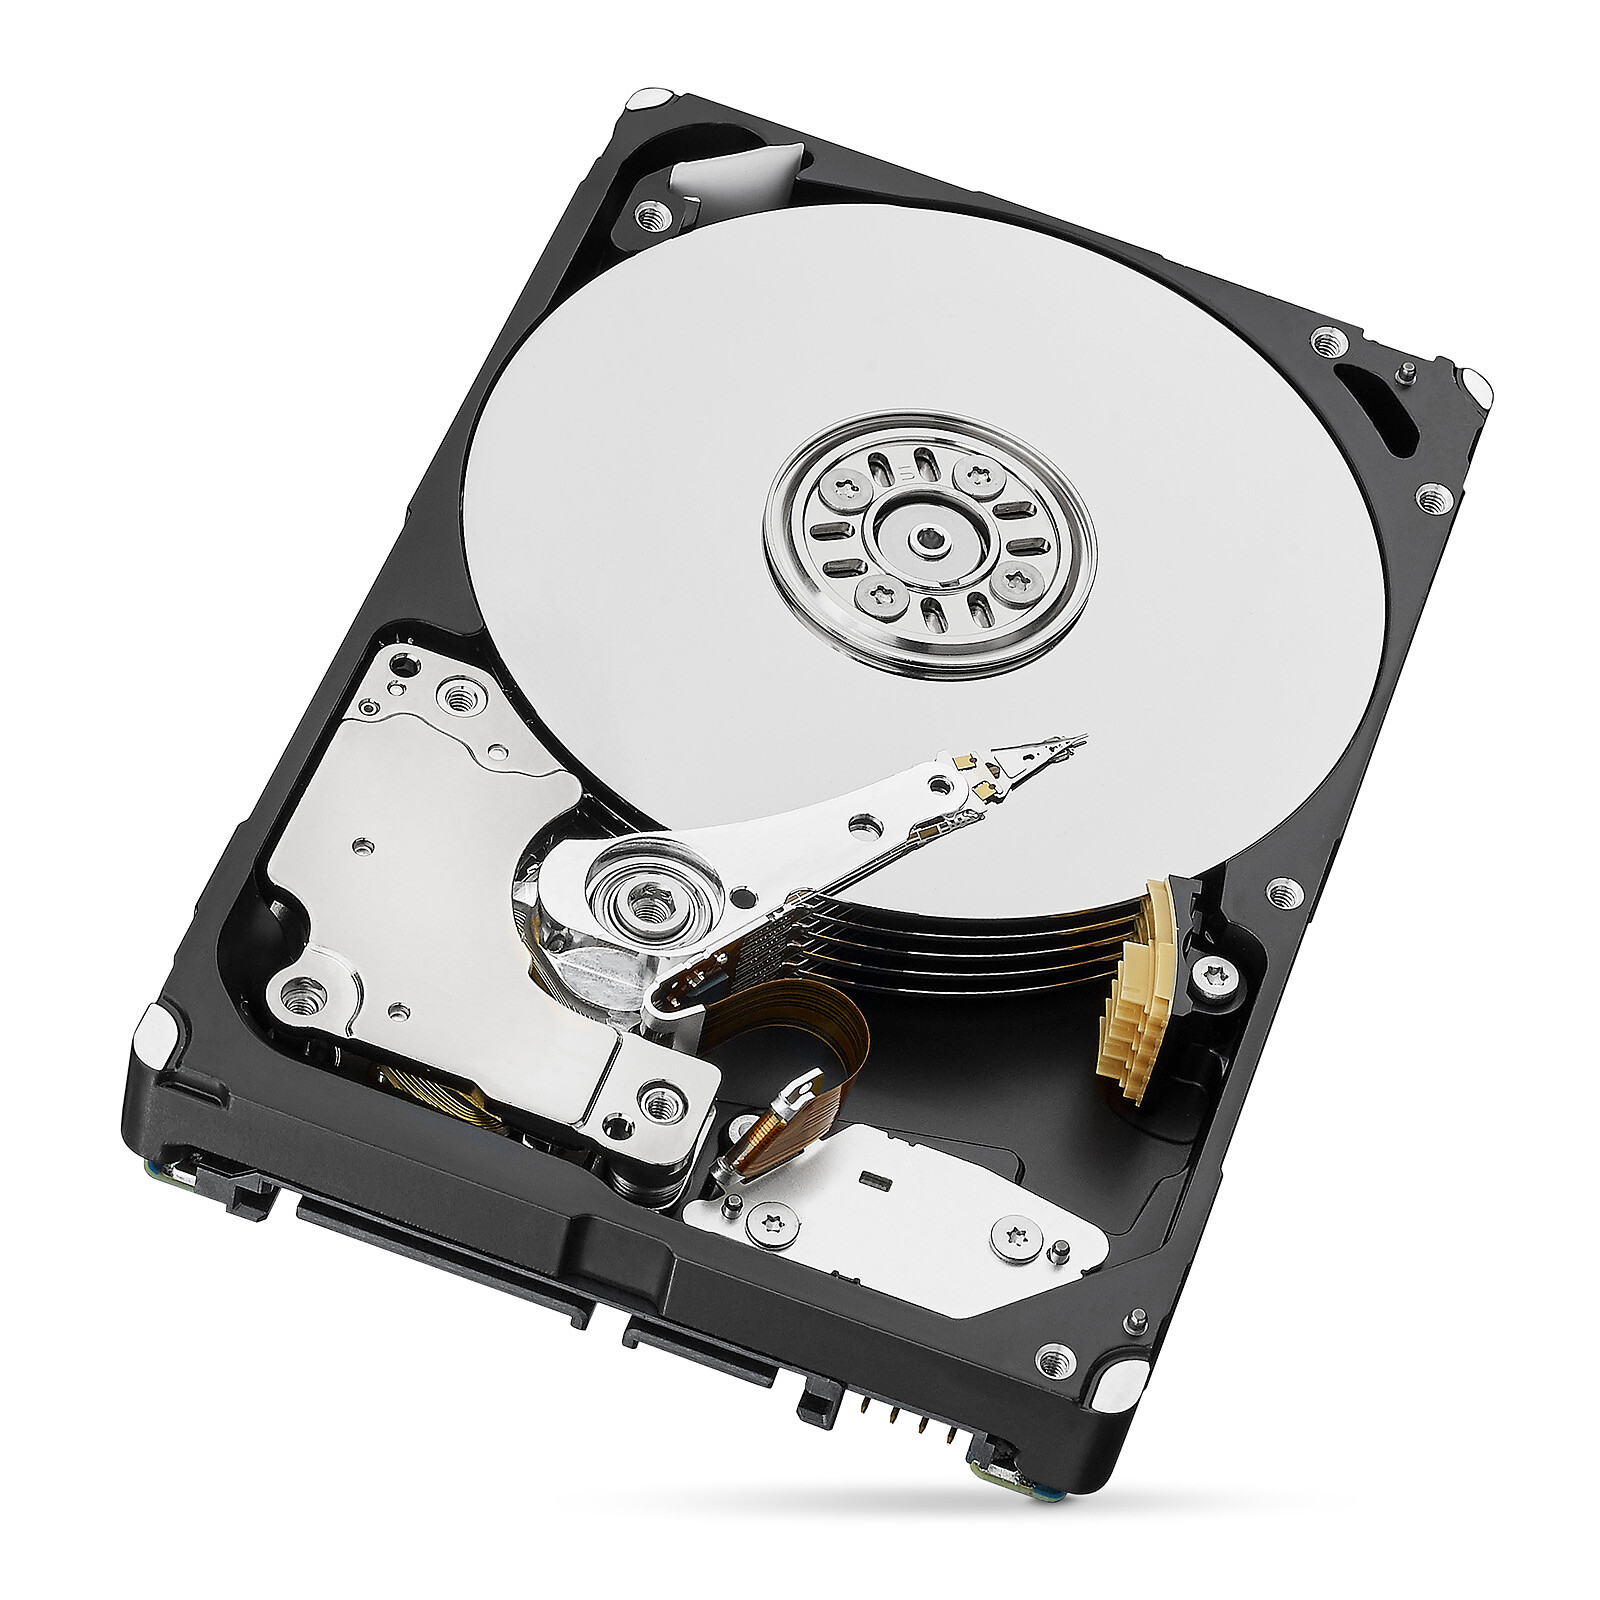 SEAGATE BarraCuda 2.5 1To SATA 6Gb/s - ST1000LM048 moins cher